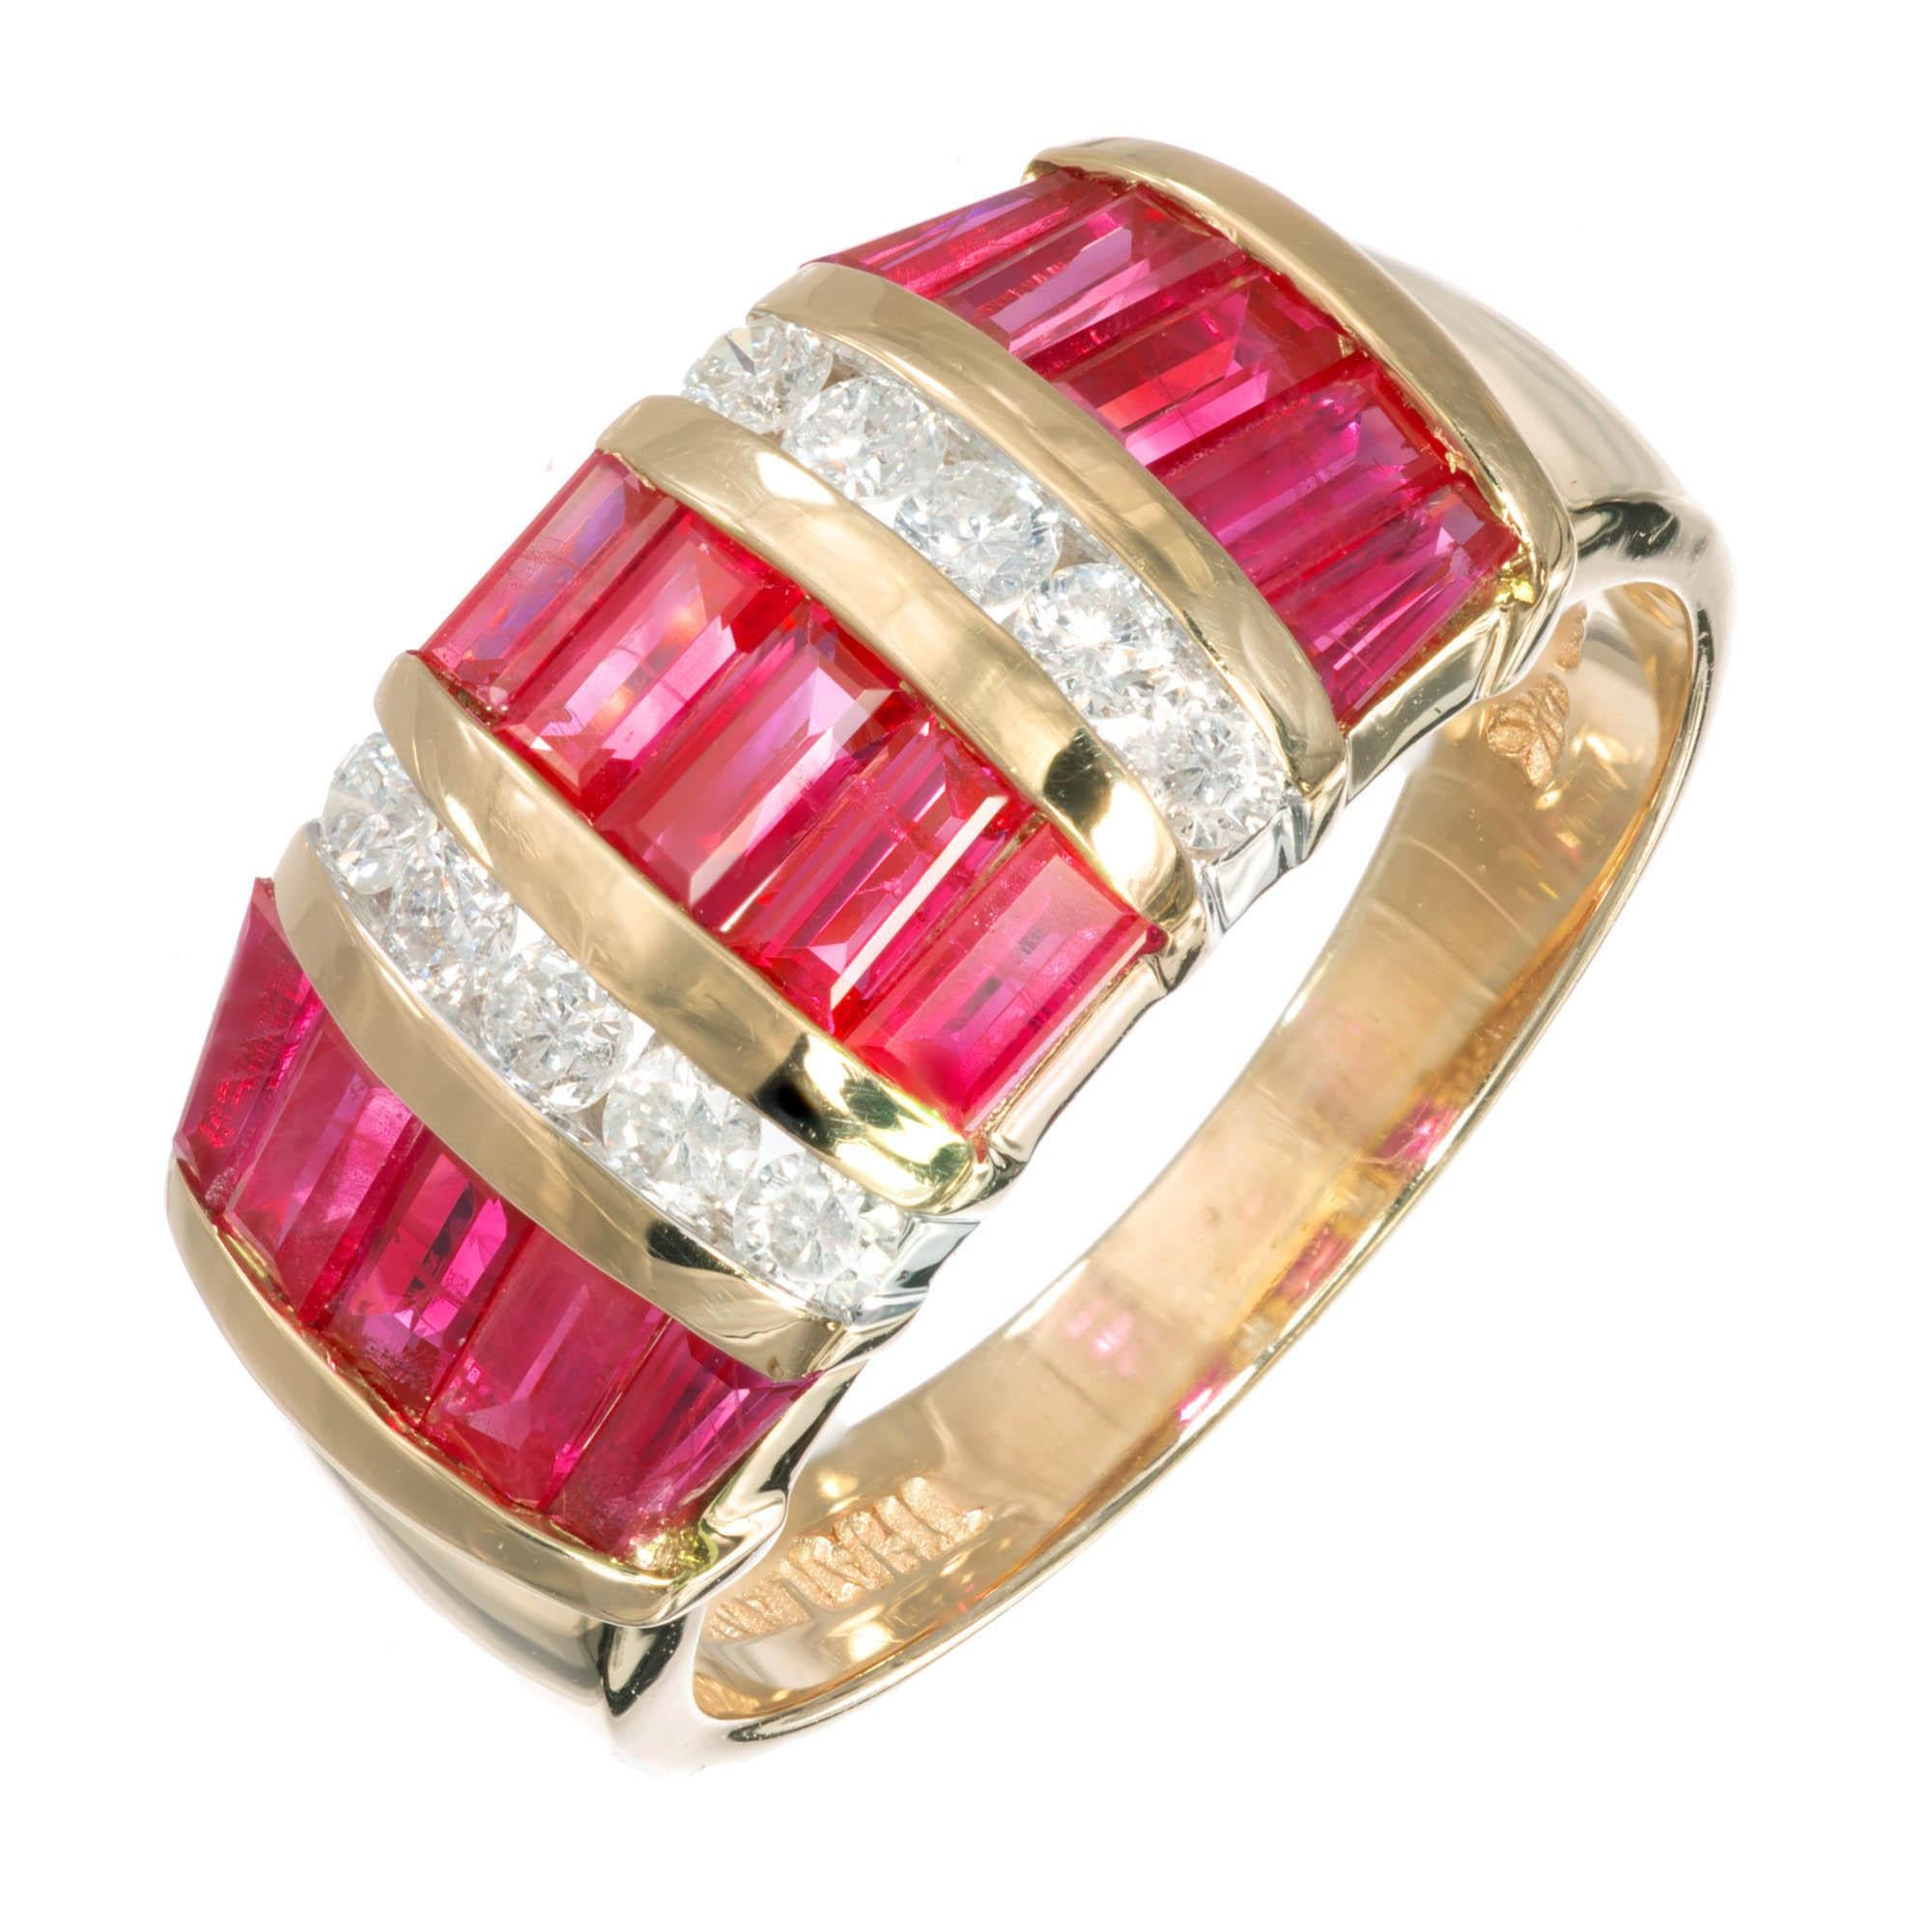 Baguette shaped rubies channel set in three rows with a channel row of round brilliant cut diamonds set between, in a 14k yellow gold setting.

15 baguette ruby Approximate 1.5 carat
10 round G-H SI diamonds Approximate .30 carat
Size 7 and